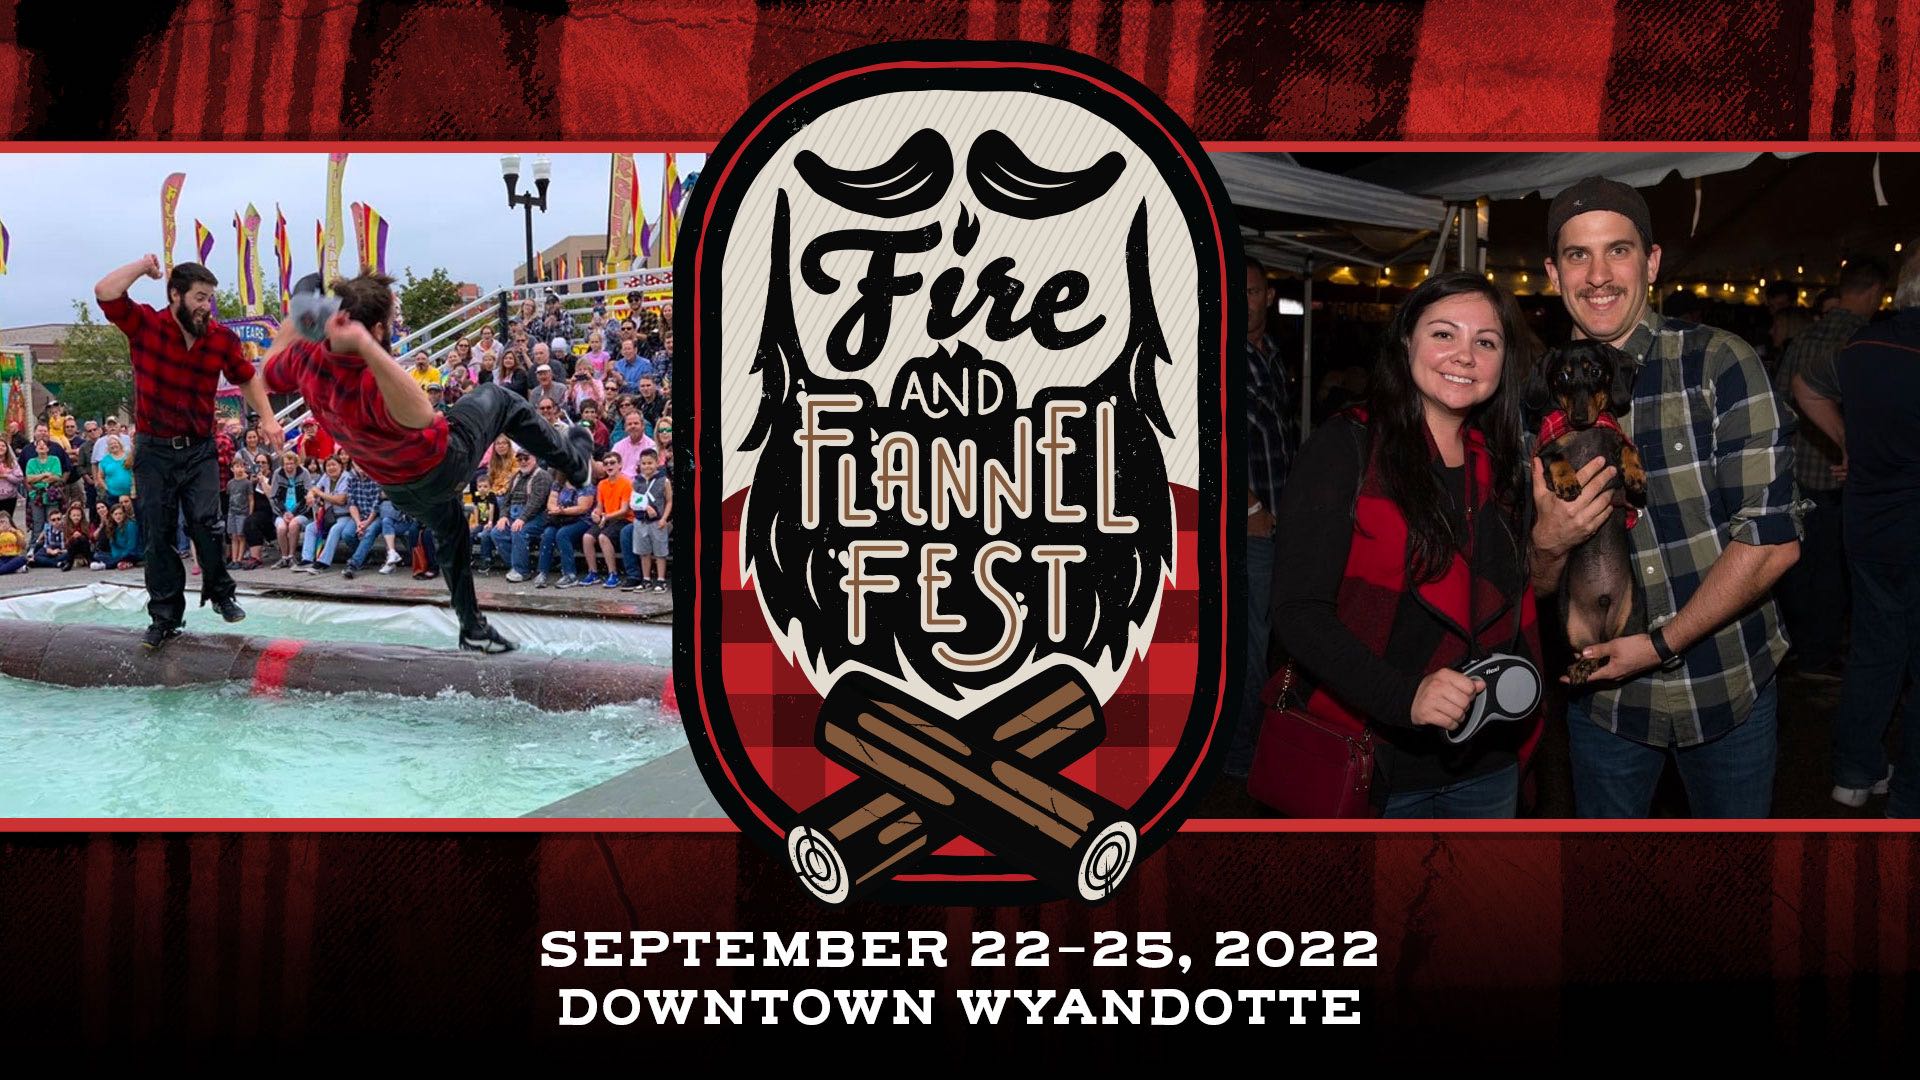 Fire & Flannel Fest, September 22 - 25, 2022 in Downtown Wyandotte; featuring images of two lumberjacks spinning on a log and a couple in flannel holding their dog